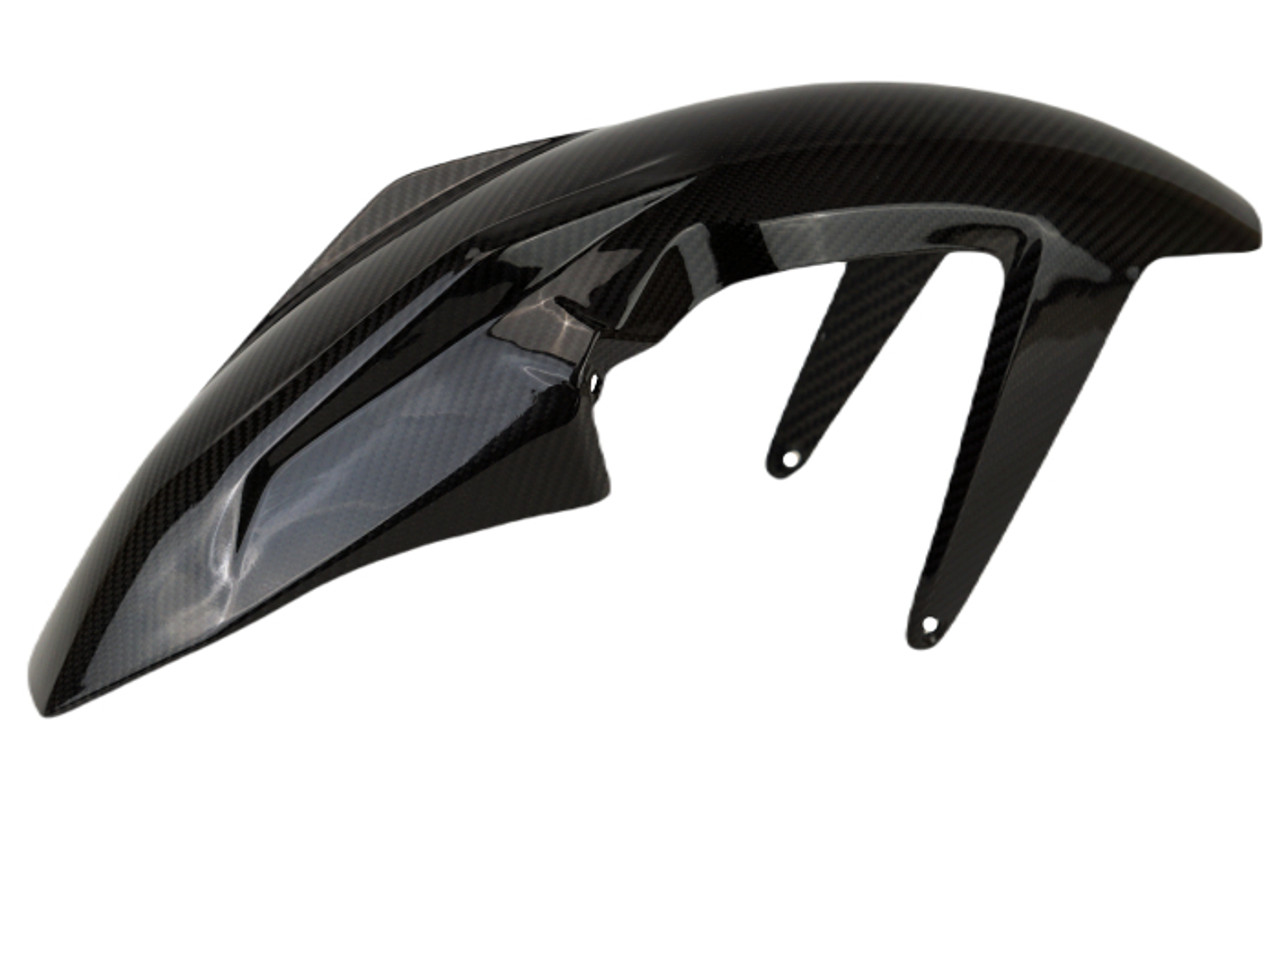 Front Fender in Glossy Twill Weave Carbon Fiber for KTM 790/890 Adventure